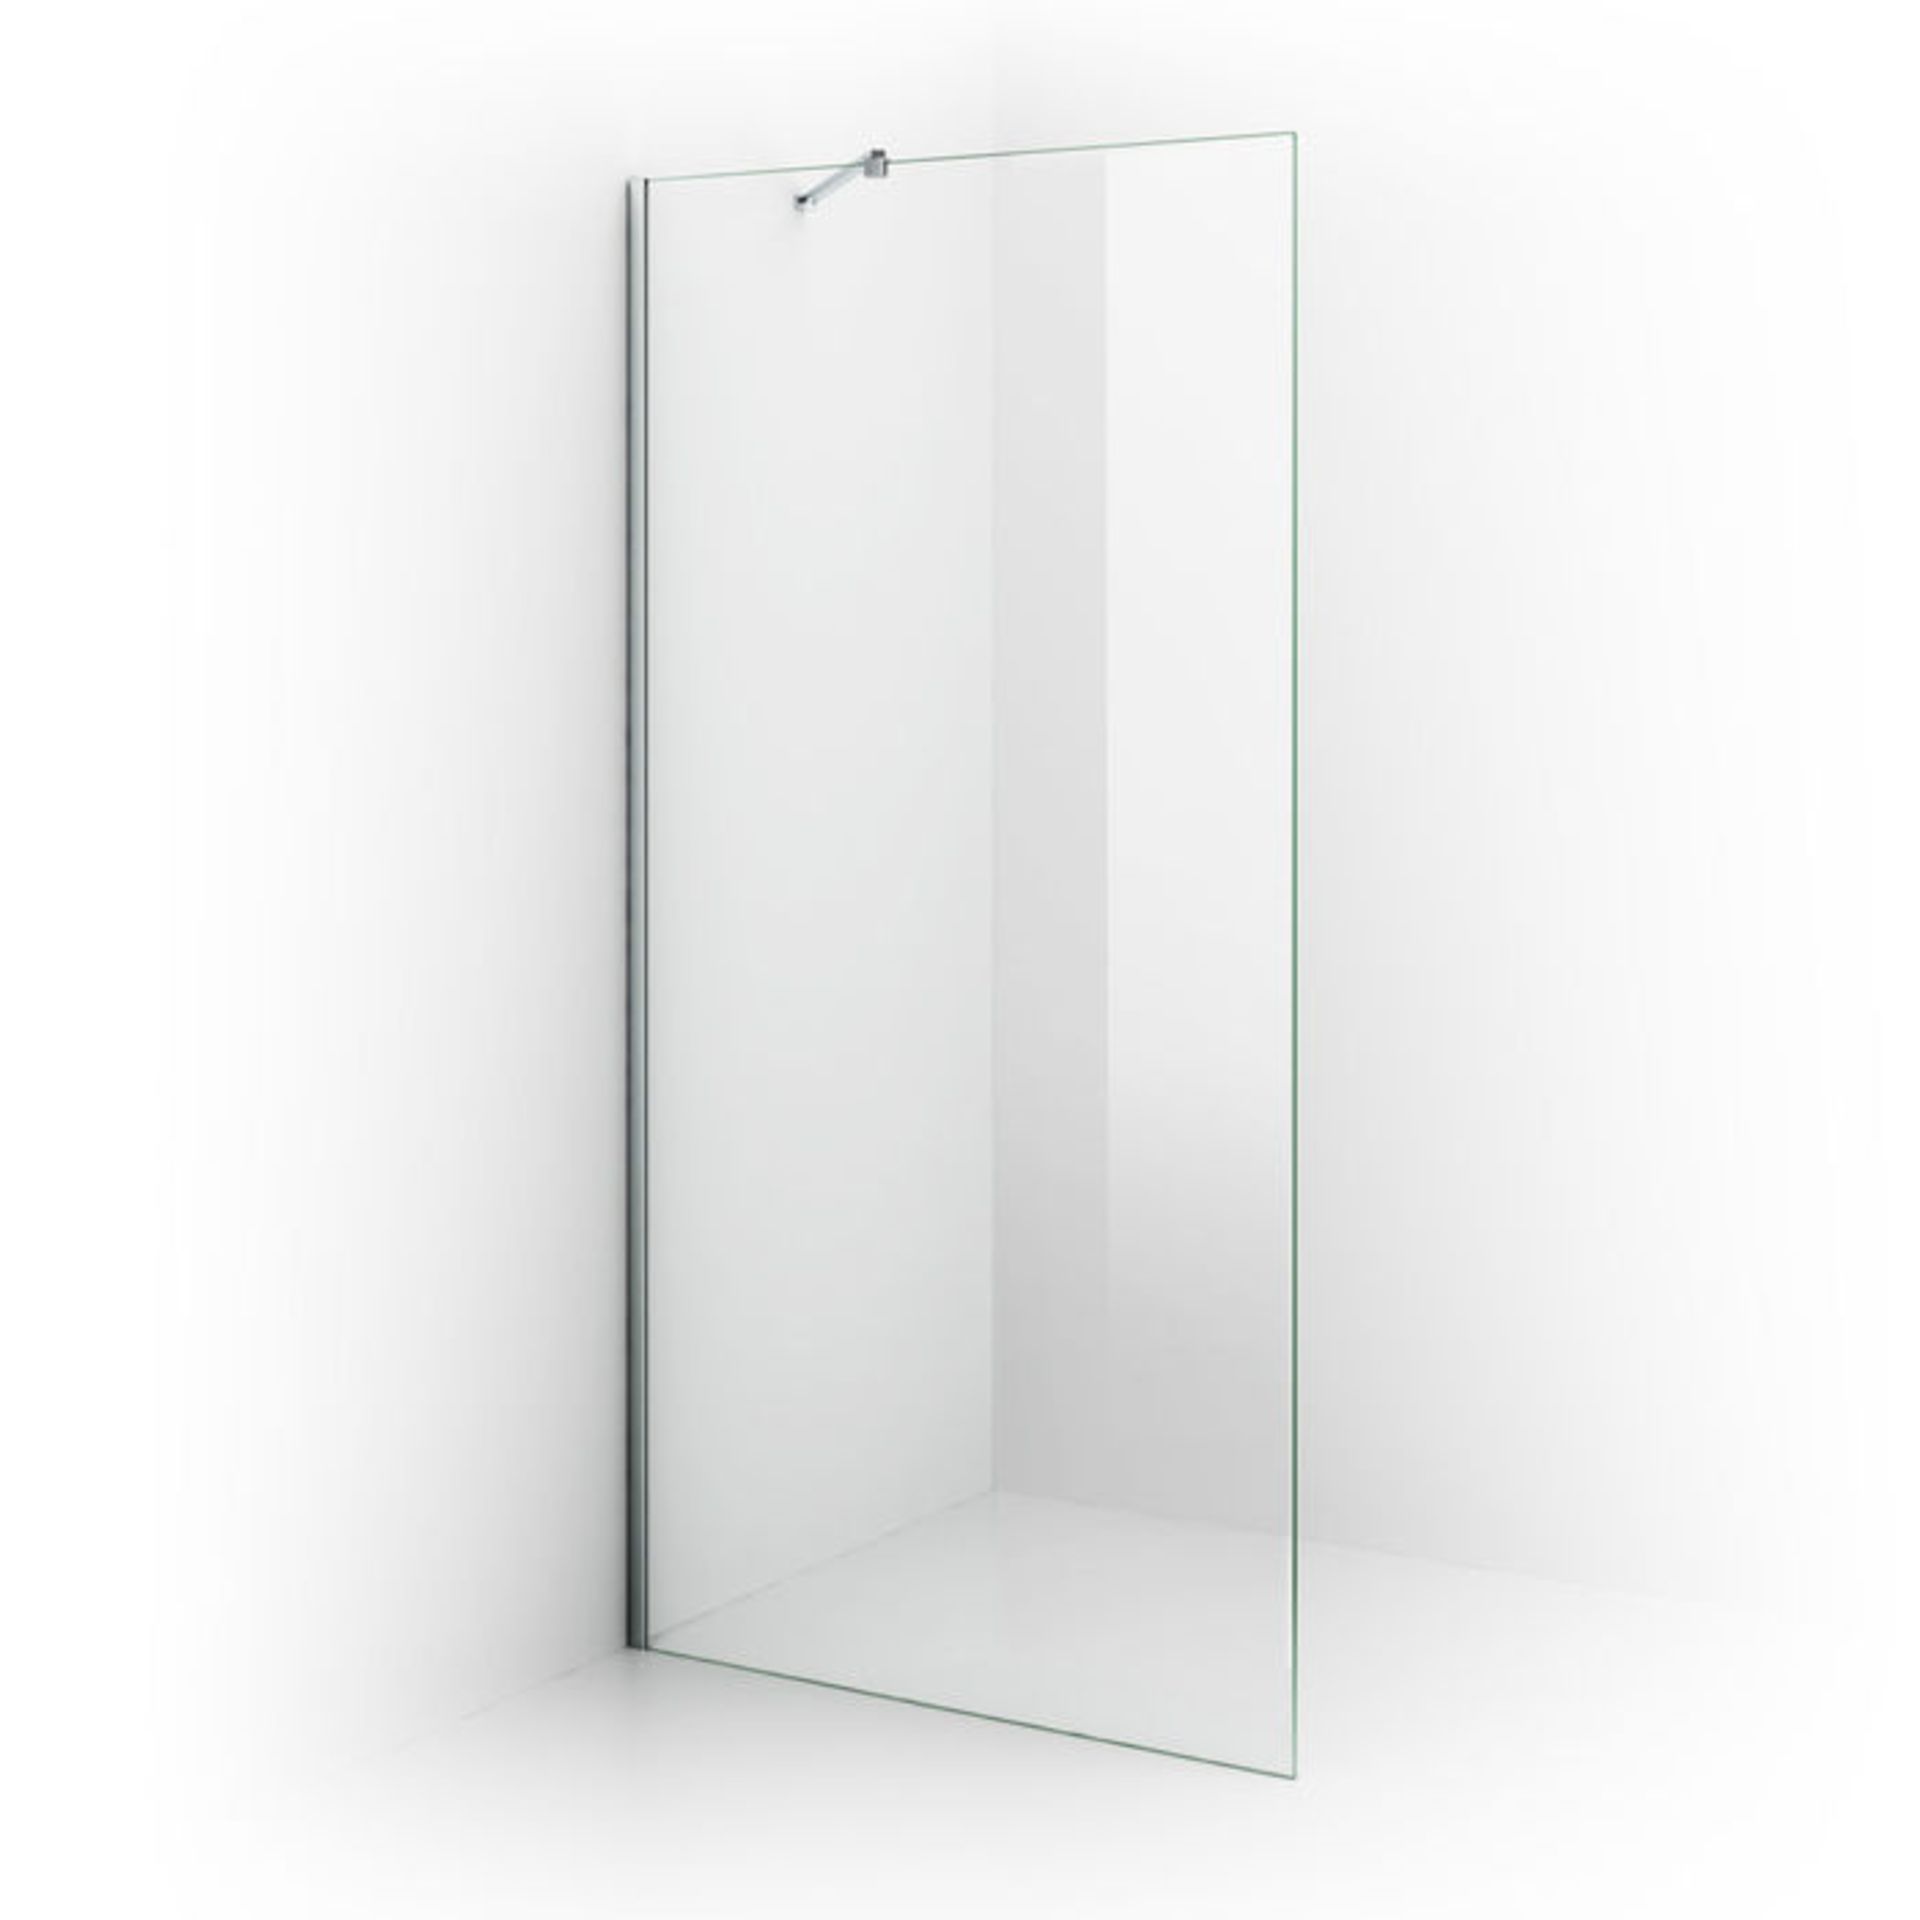 (CT5) 1400mm - 8mm - Premium EasyClean Wetroom Panel. 8mm EasyClean glass - Our glass has water... - Image 3 of 4